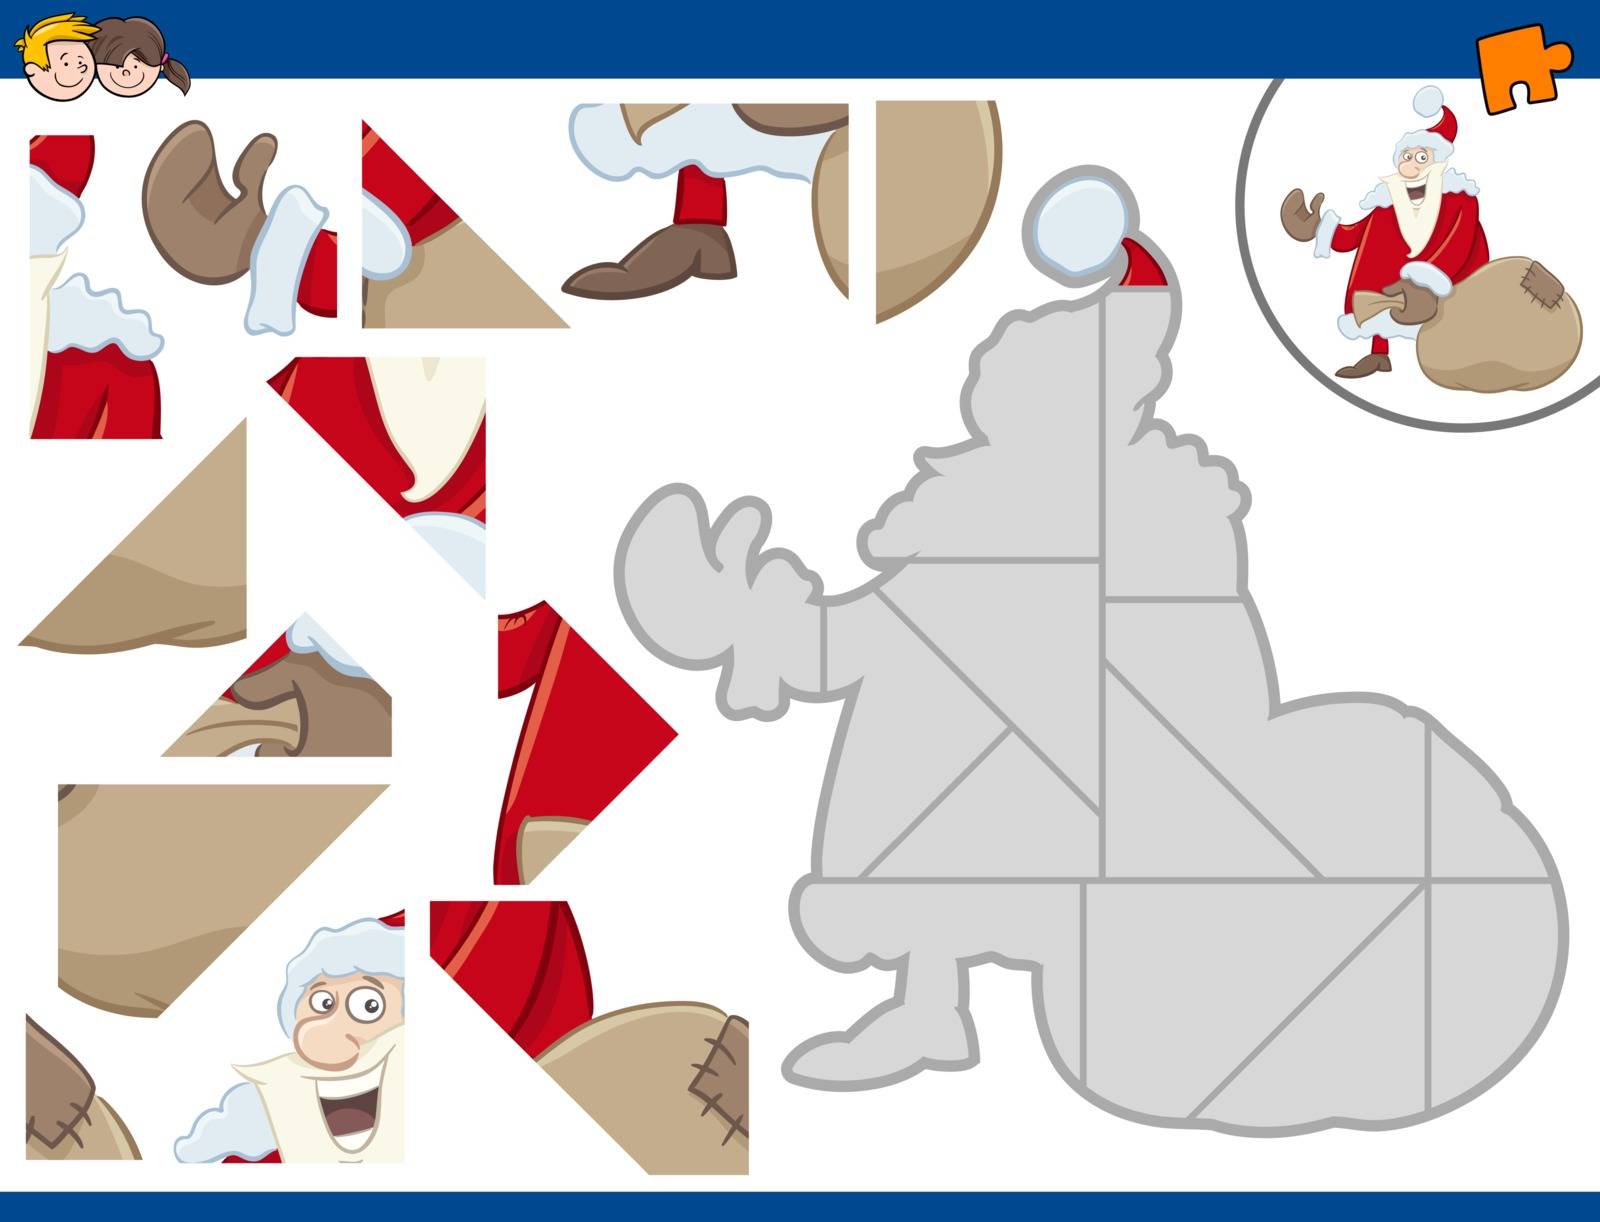 Cartoon Illustration of Educational Jigsaw Puzzle Activity for Children with Santa Claus